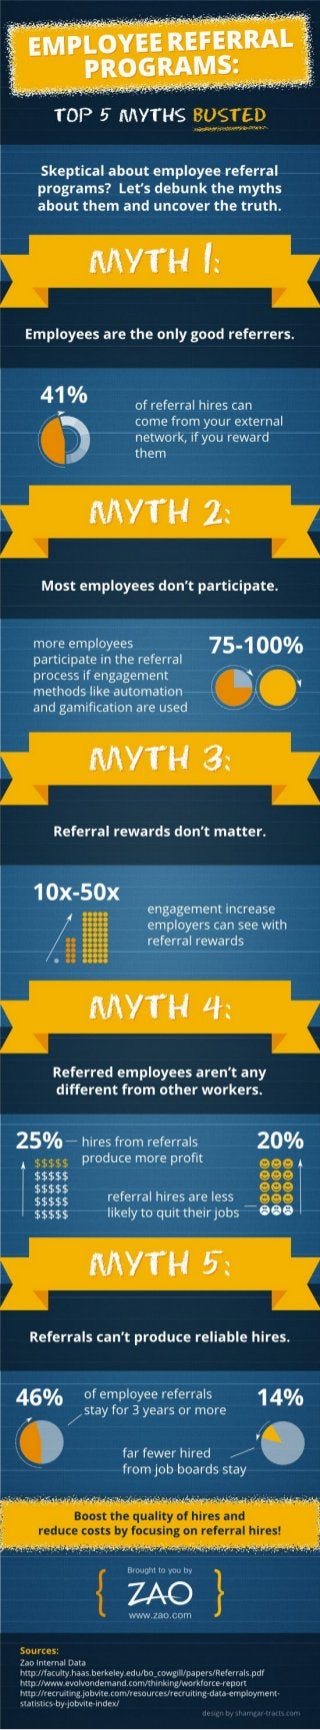 Employee Referral Programs: Top 5 Myths Busted [INFOGRAPHIC]